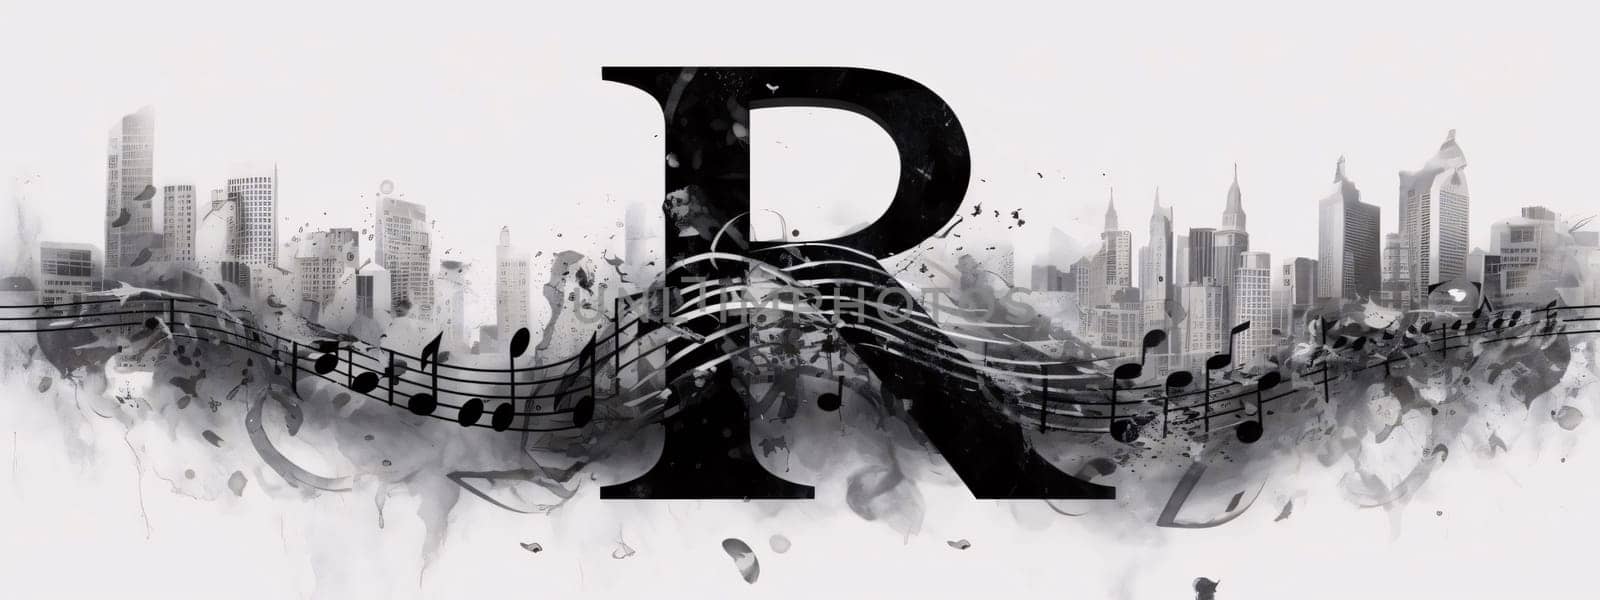 Graphic alphabet letters: Abstract musical background. Black and white illustration with musical notes and city